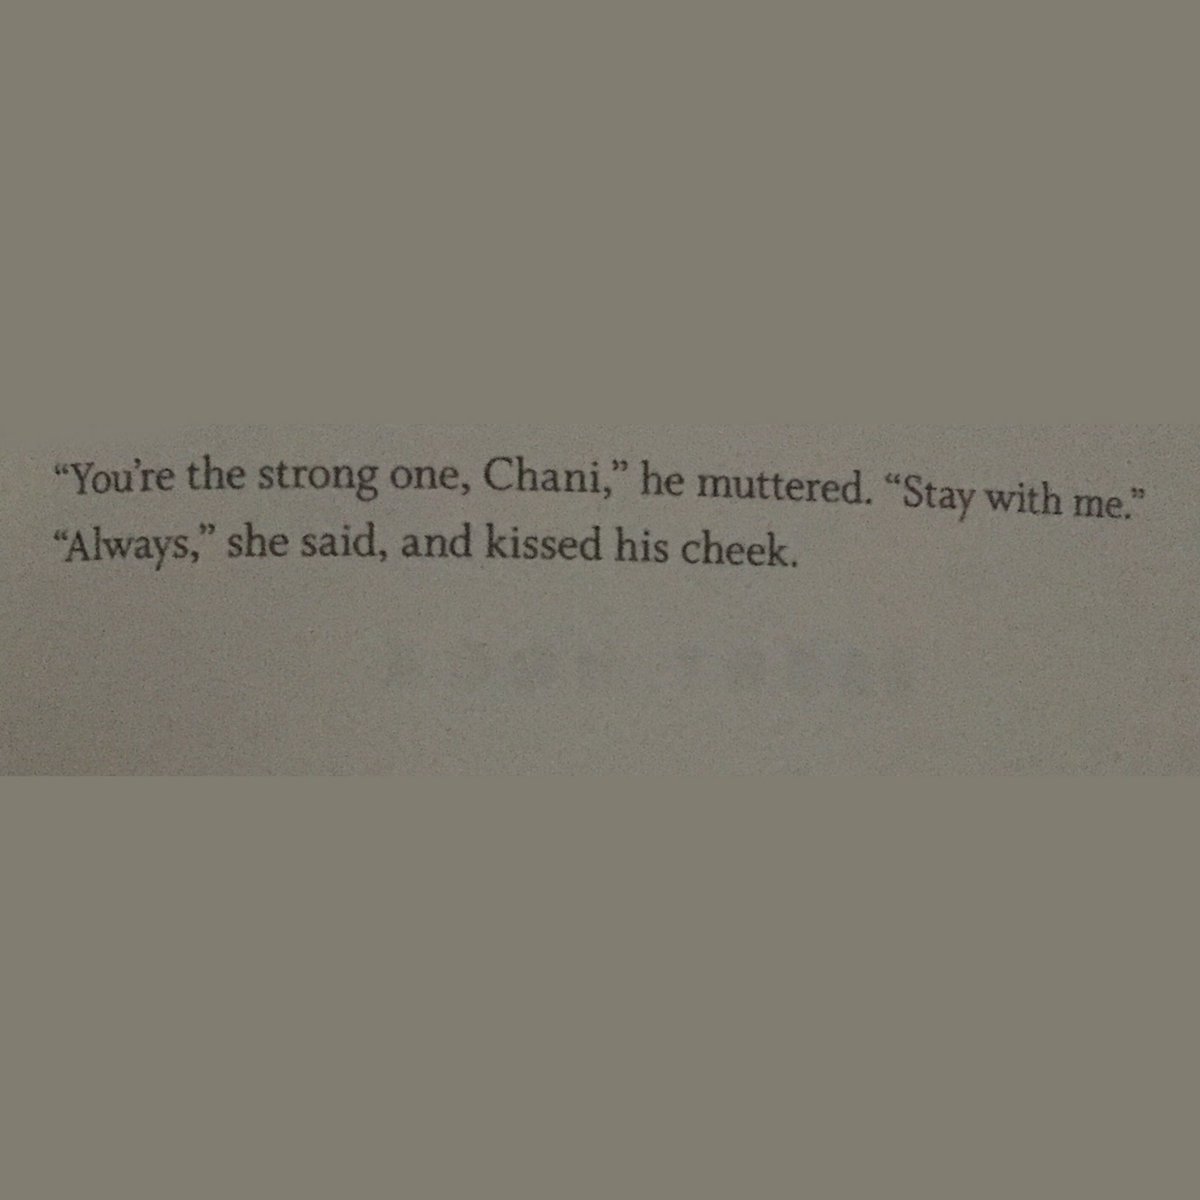 So at certain times Chani embodies Yang, while Paul embodies Yin. A specific examples of this, is a line from their love scene in the book, where Paul calls Chani the strong one.